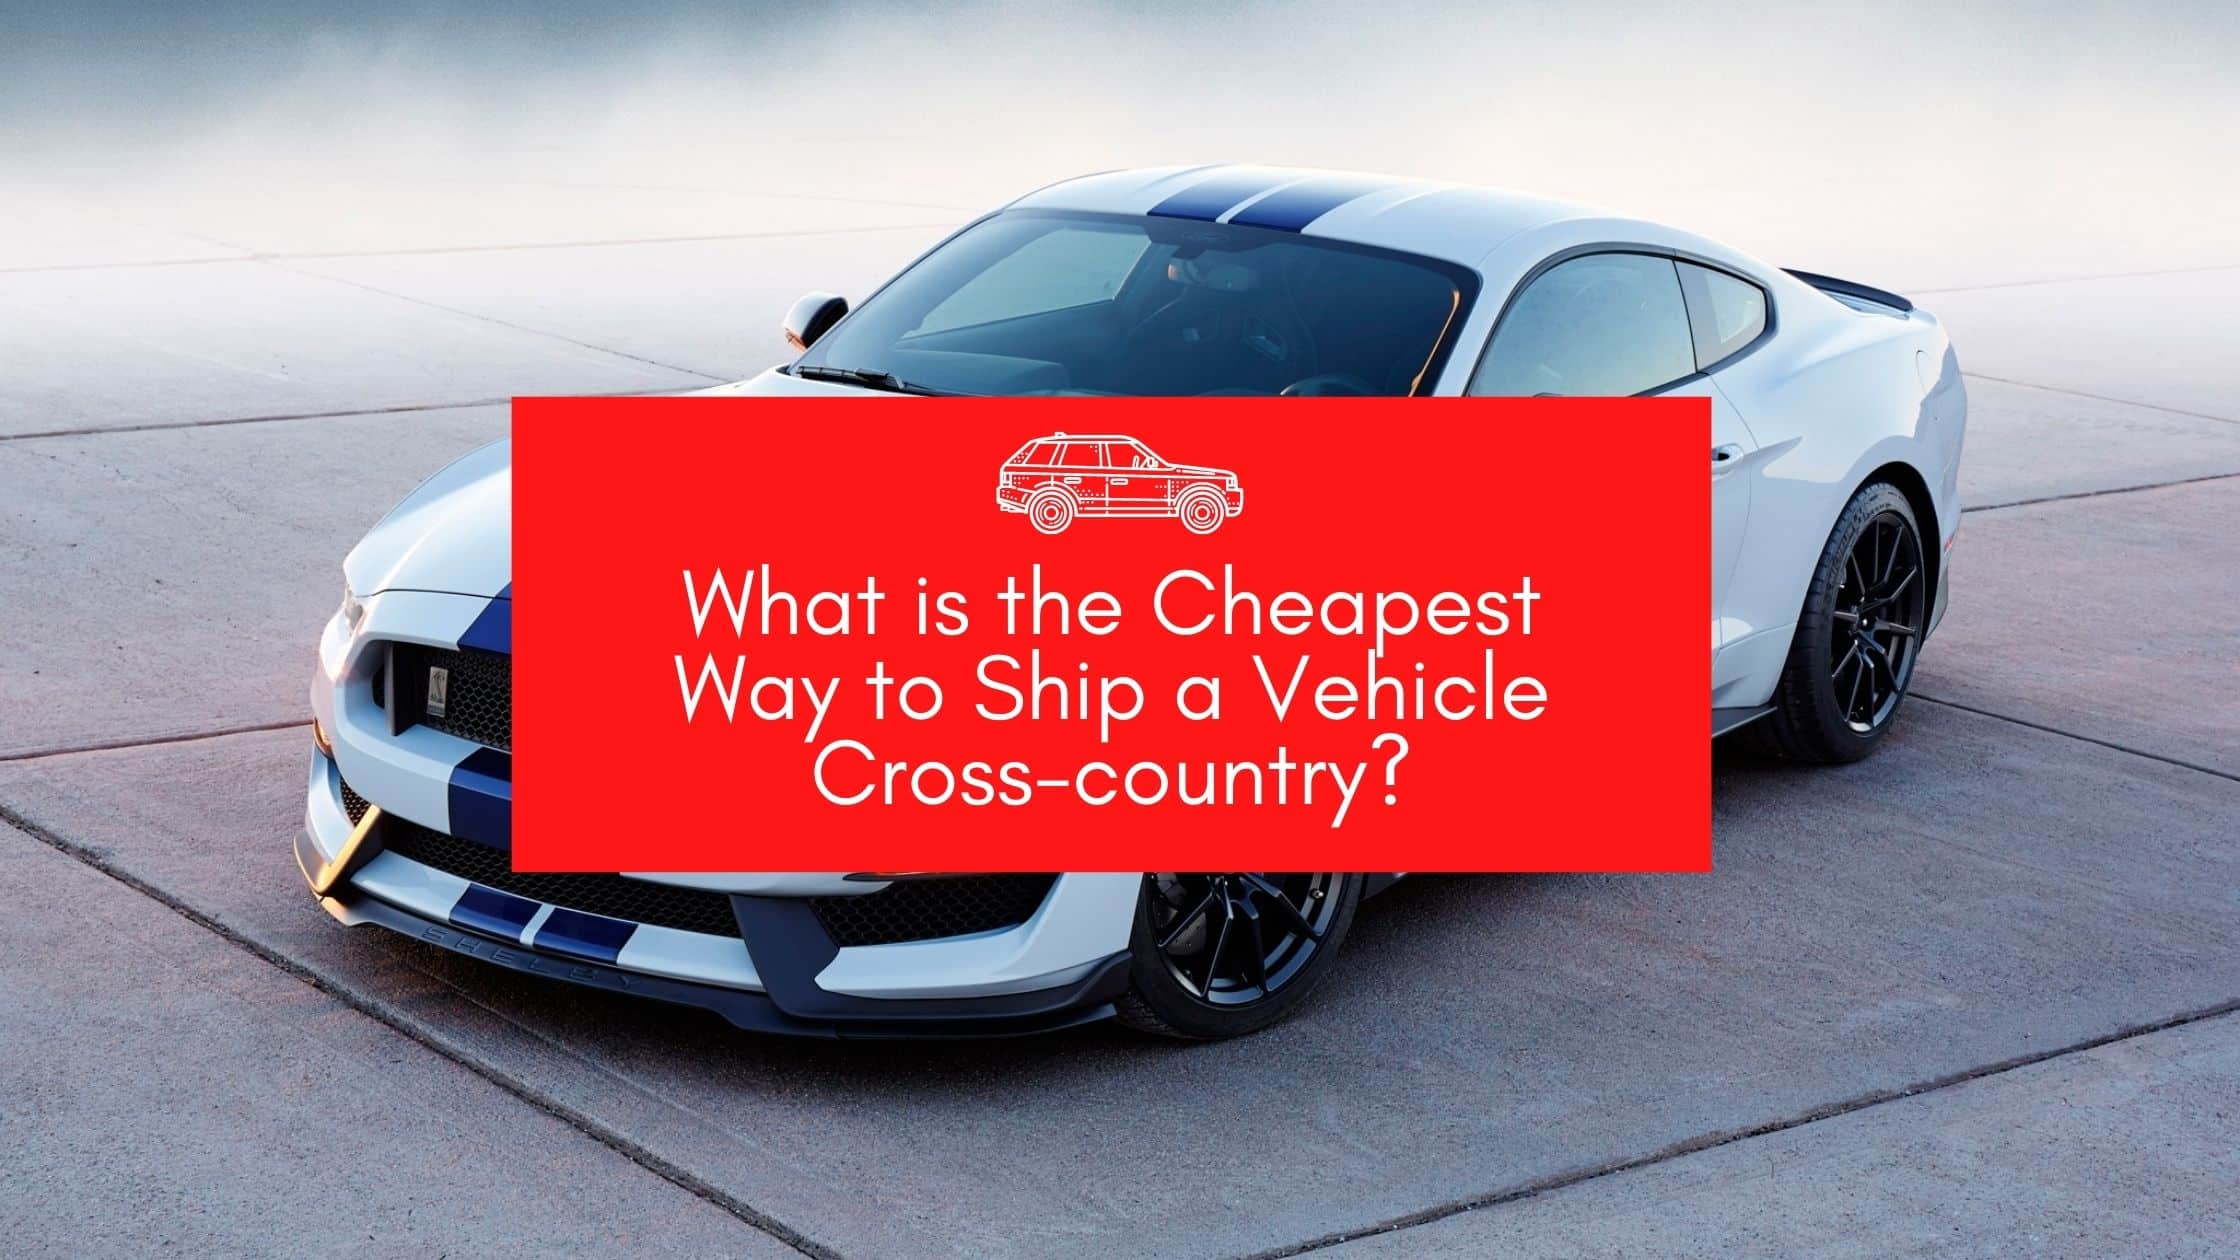 What is the Cheapest Way to Ship a Vehicle Cross-country?